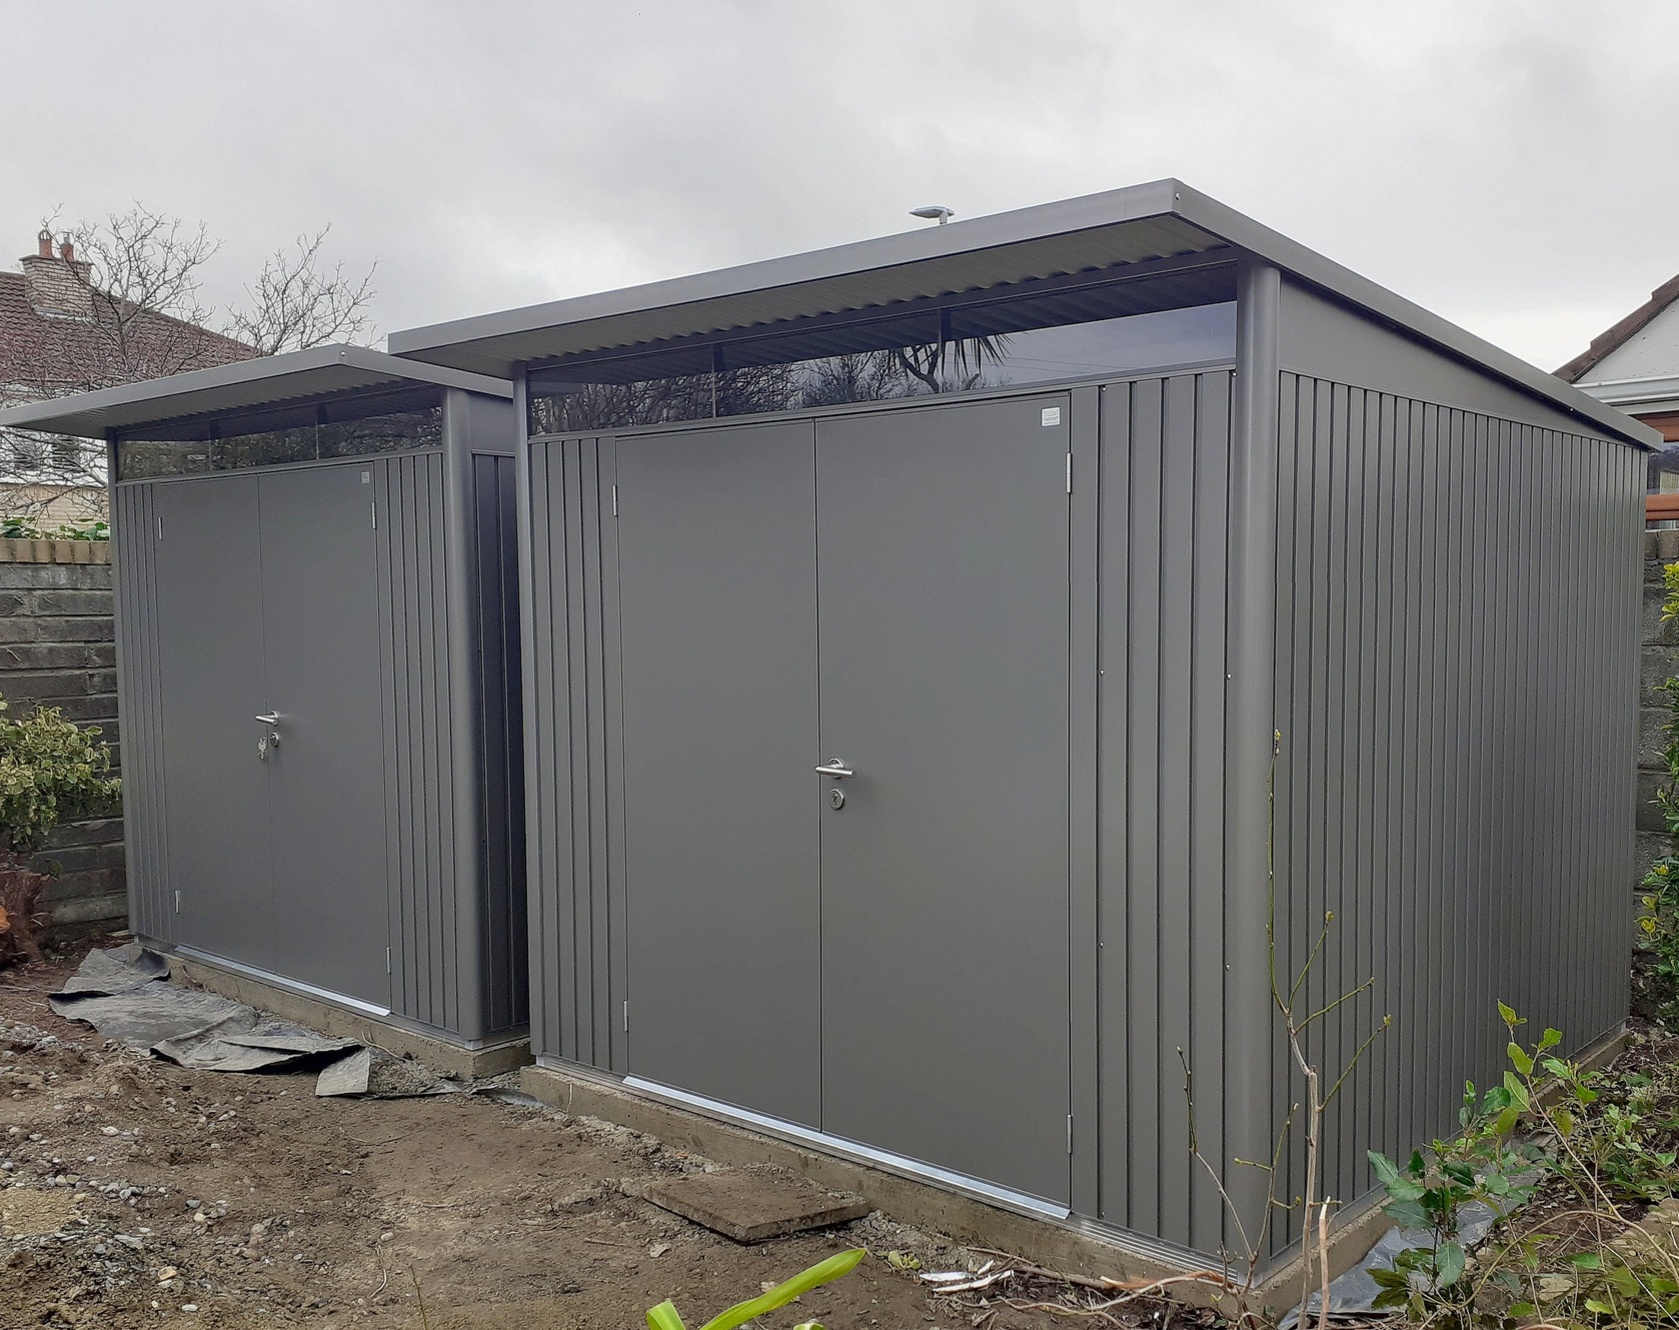 Biohort AvantGarde A7 Garden Sheds - exceptional quality, blending functionality, durability and sleek design  |  Supplied + Fitted in Knocklyon, Dublin 16 by Owen Chubb Landscapers - Ireland's premier Biohort Supplier & Installer.